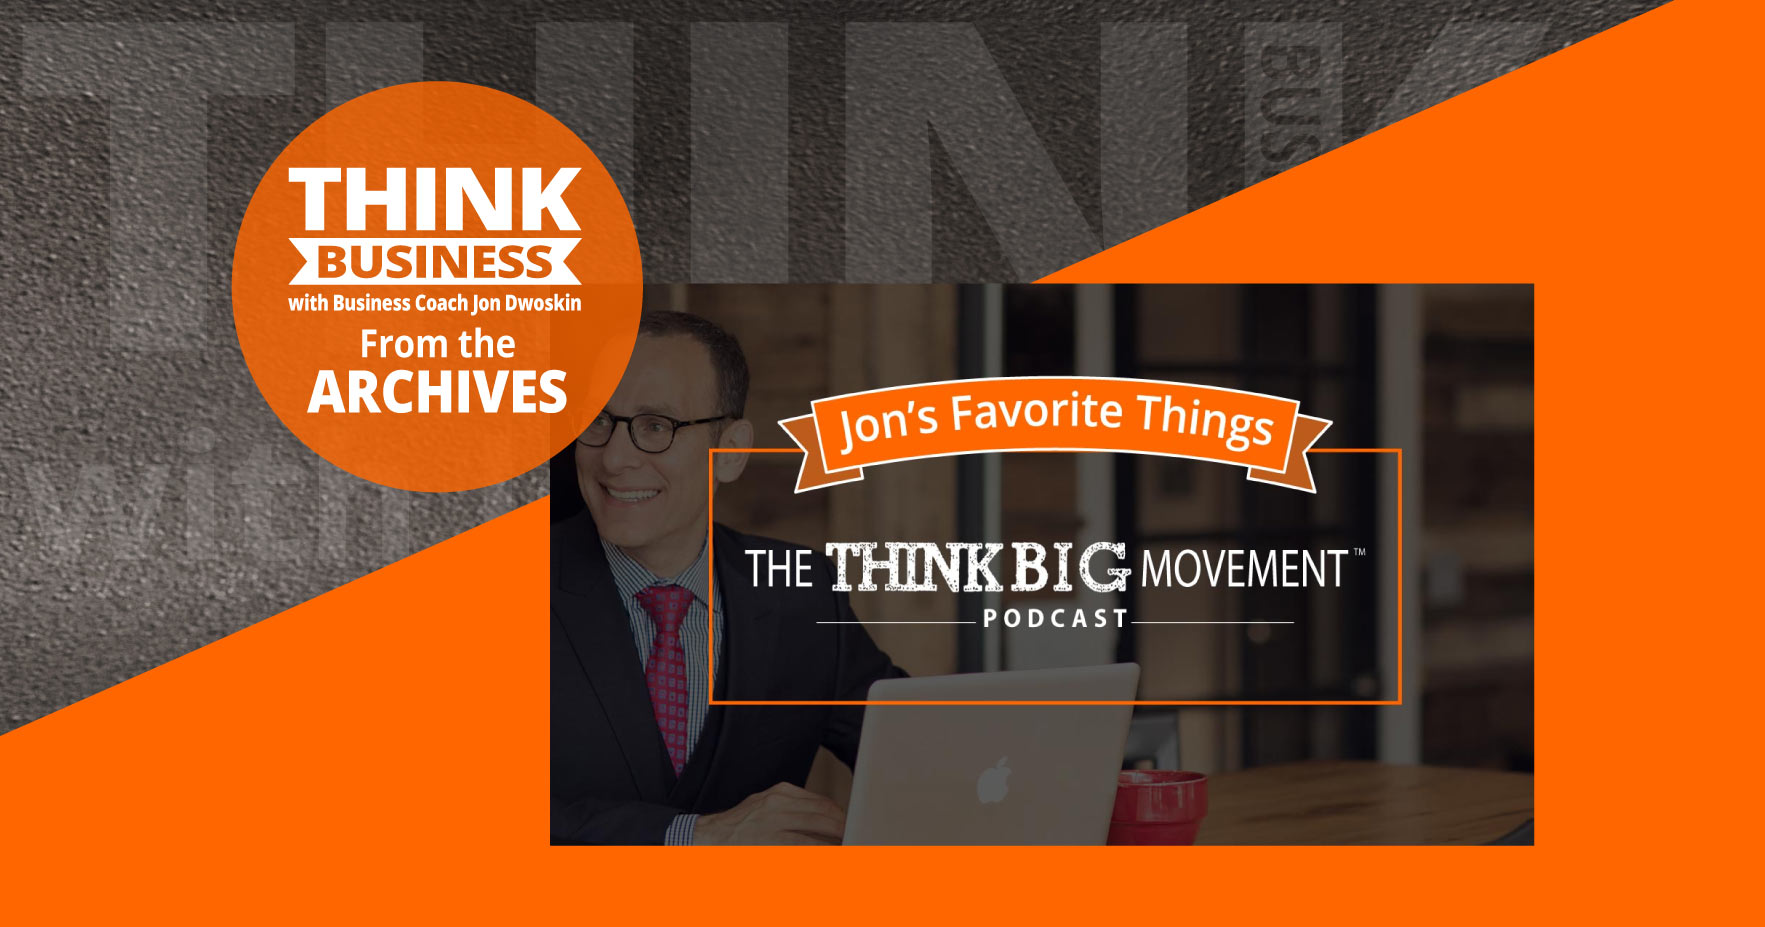 THINK Business Podcast: Jon's Favorite Things: The Richest Man in Babylon